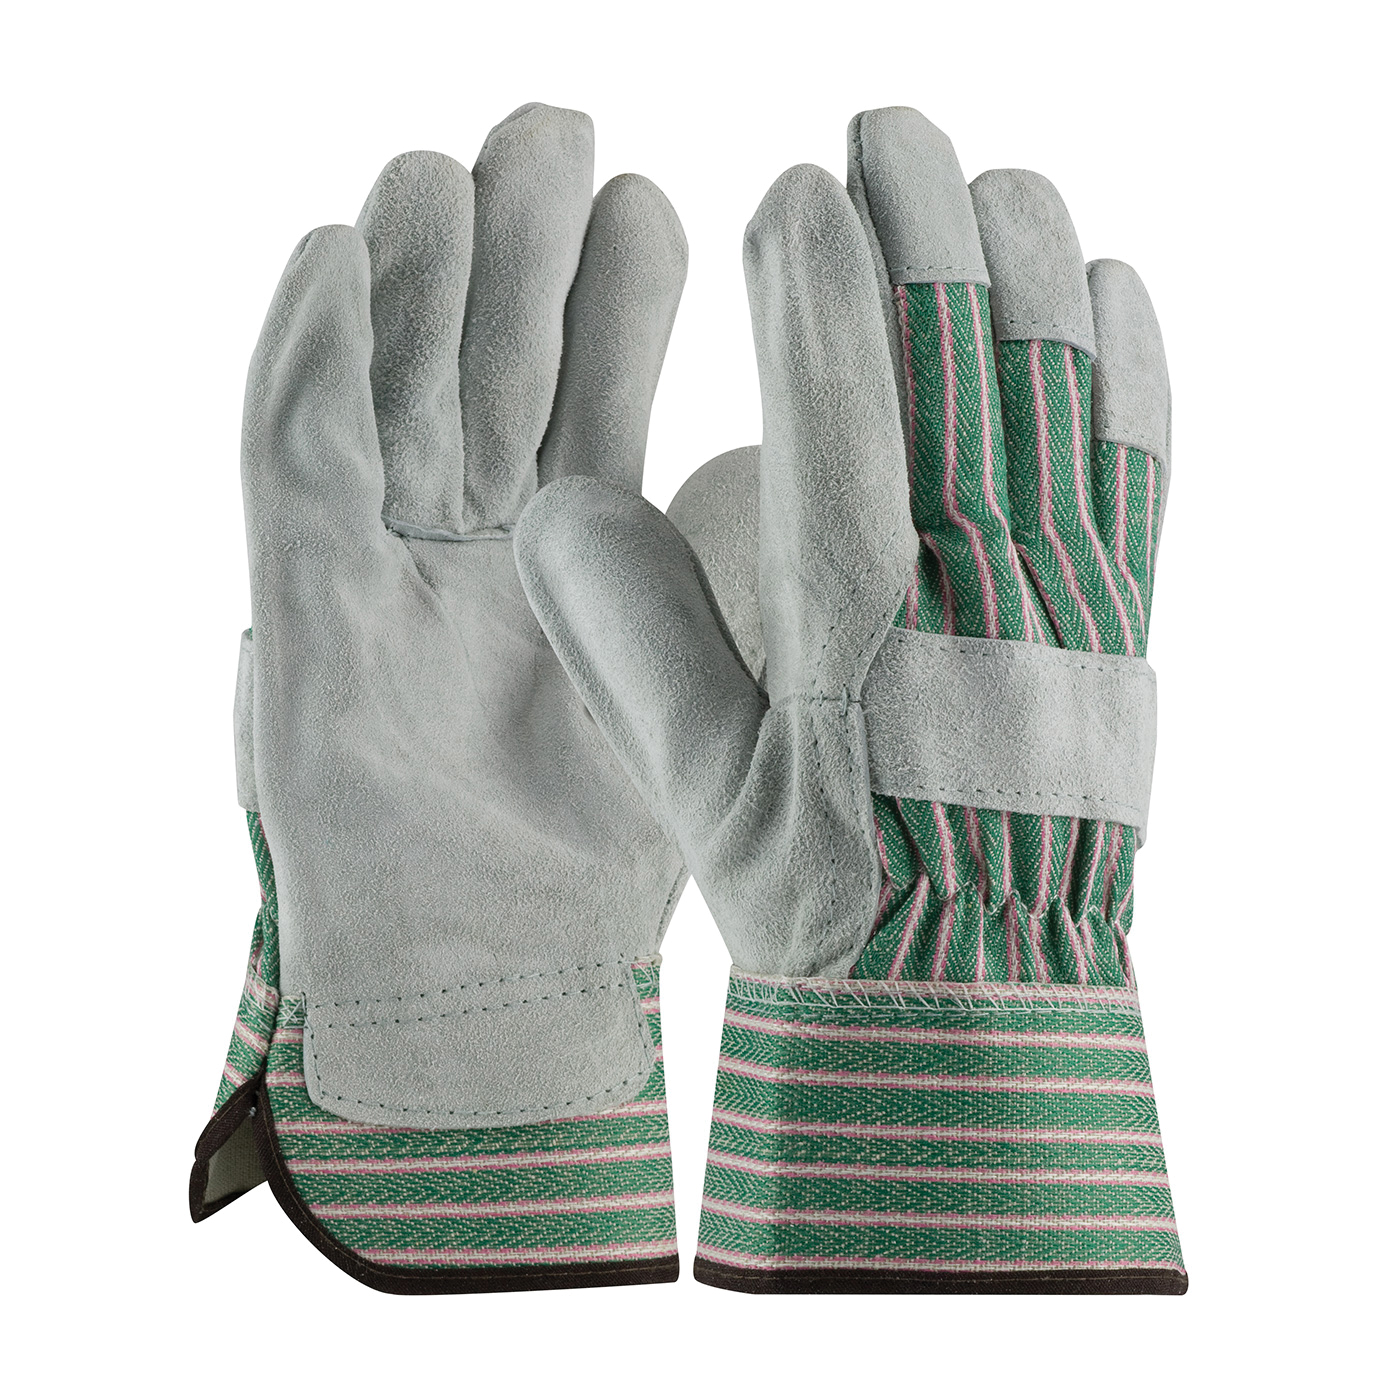 PIP® 83-6563/L/LHO Bronze 83-6563 B-Grade Left Hand Only General Purpose Gloves, Leather Palm, Gunn Cut with Wing Thumb Style, L, Shoulder Split Cowhide Leather Palm, 75% Cowhide Leather/25% Cotton, Gray/Green/Pink, Rubberized Safety Cuff, Uncoated Coating